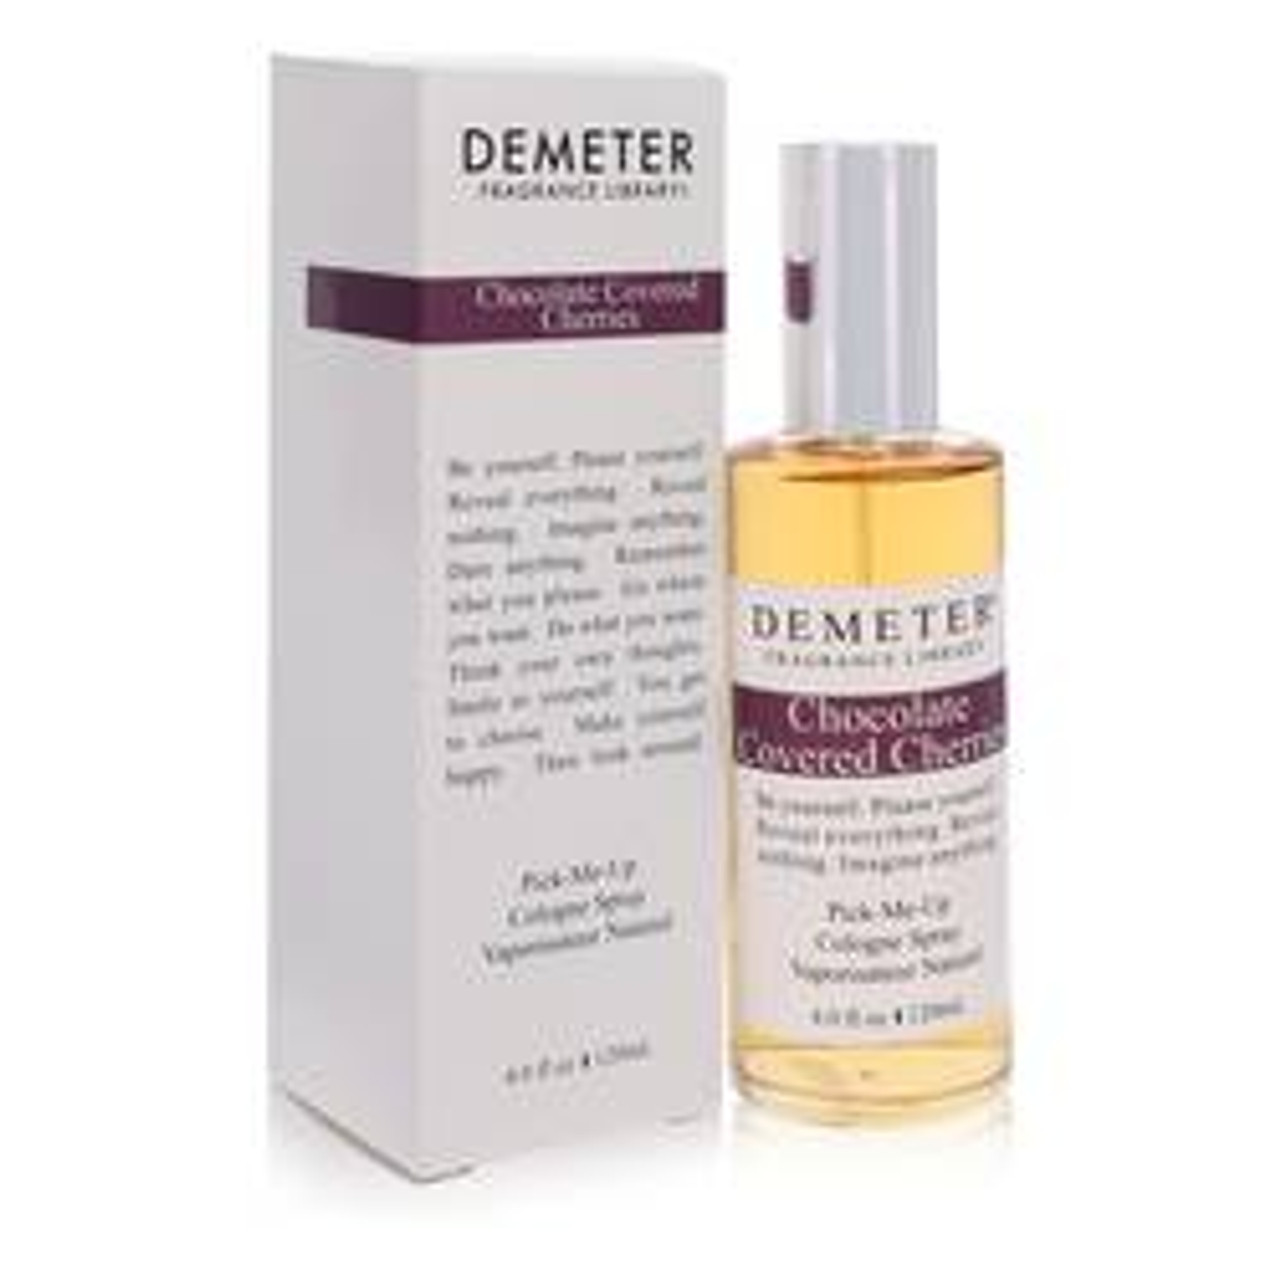 Demeter Chocolate Covered Cherries Perfume By Demeter Cologne Spray 4 oz for Women - [From 79.50 - Choose pk Qty ] - *Ships from Miami